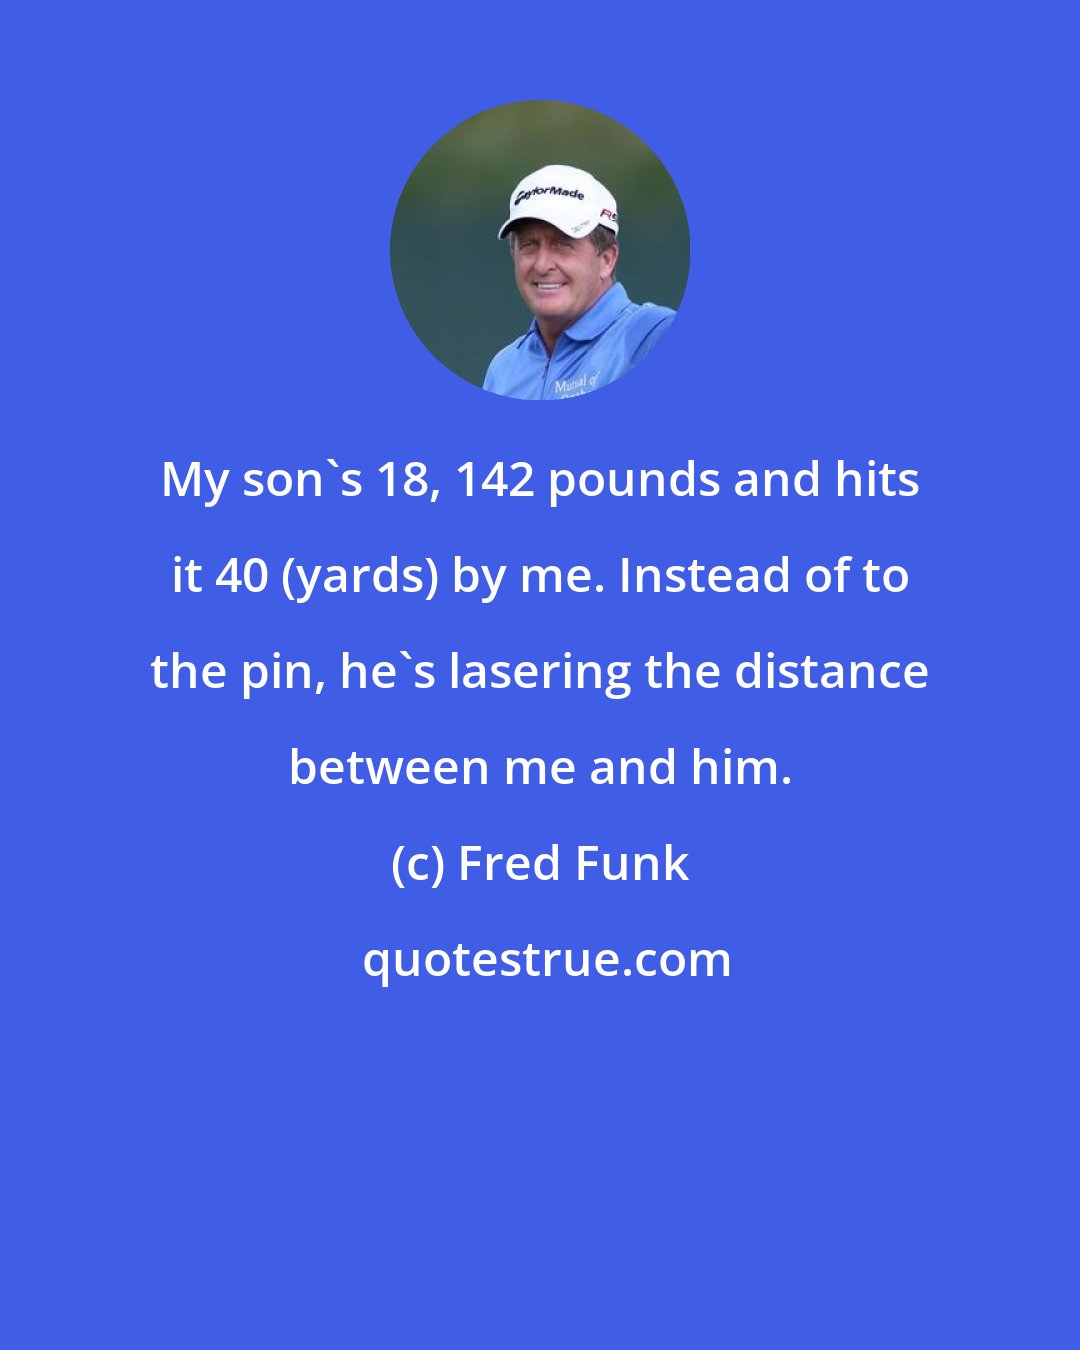 Fred Funk: My son's 18, 142 pounds and hits it 40 (yards) by me. Instead of to the pin, he's lasering the distance between me and him.